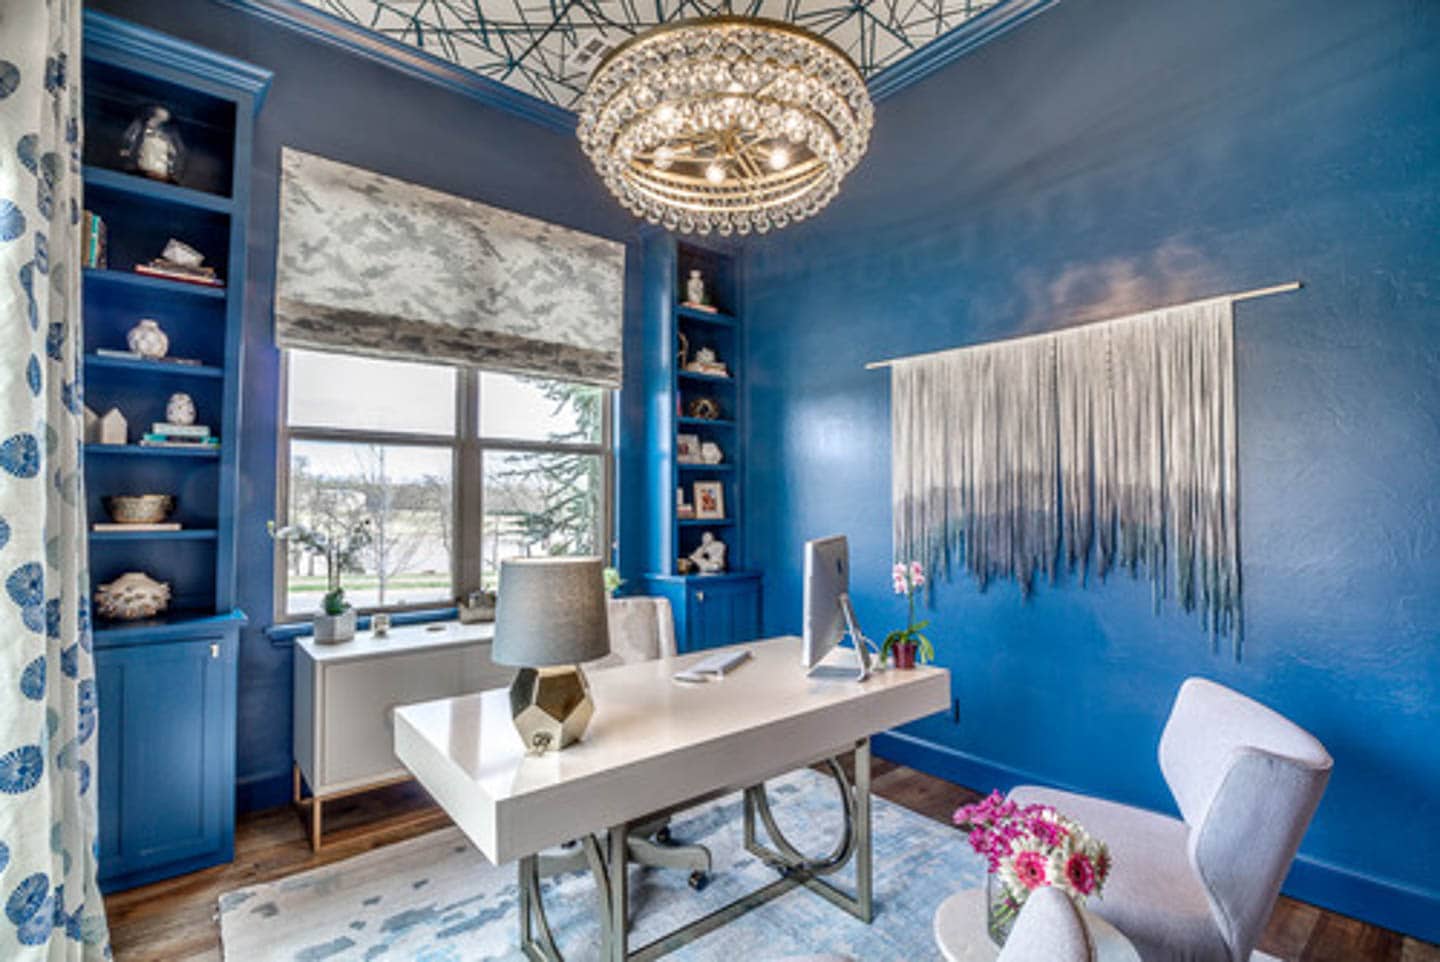 Home office painted in gloss blue paint with a white desk and chair, and blue and white ceiling, curtains and rug